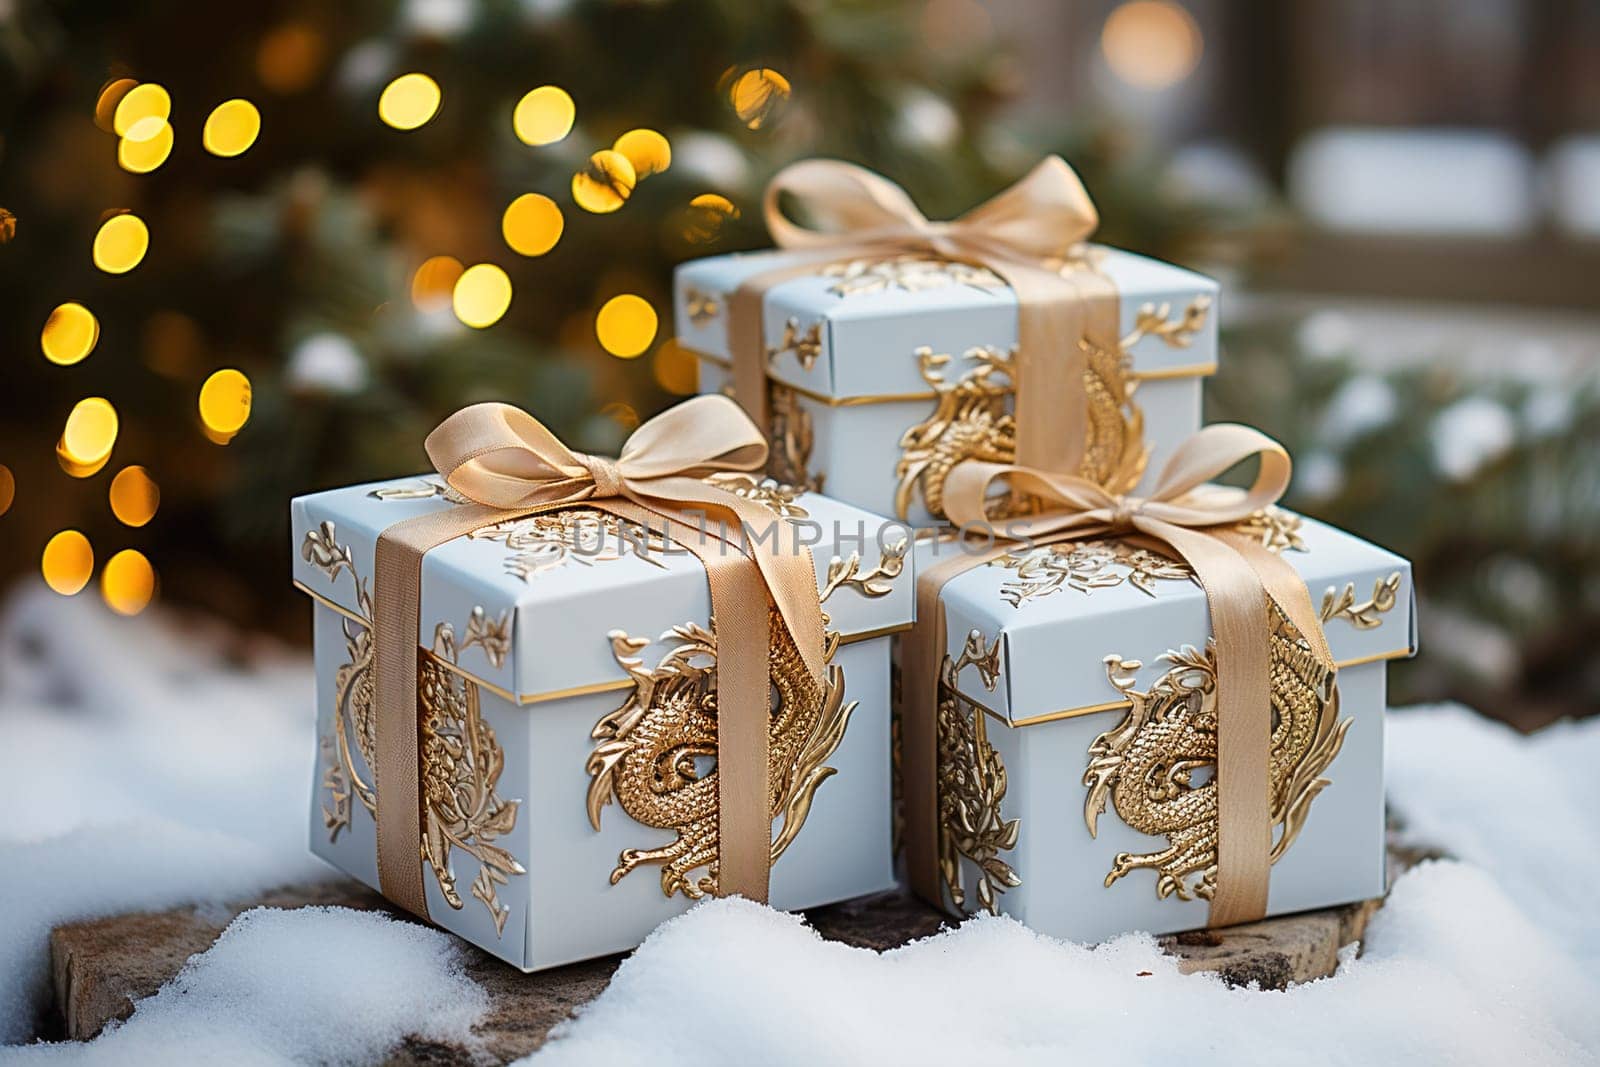 A white gift box with an image of a dragon tied with a yellow ribbon. by Yurich32